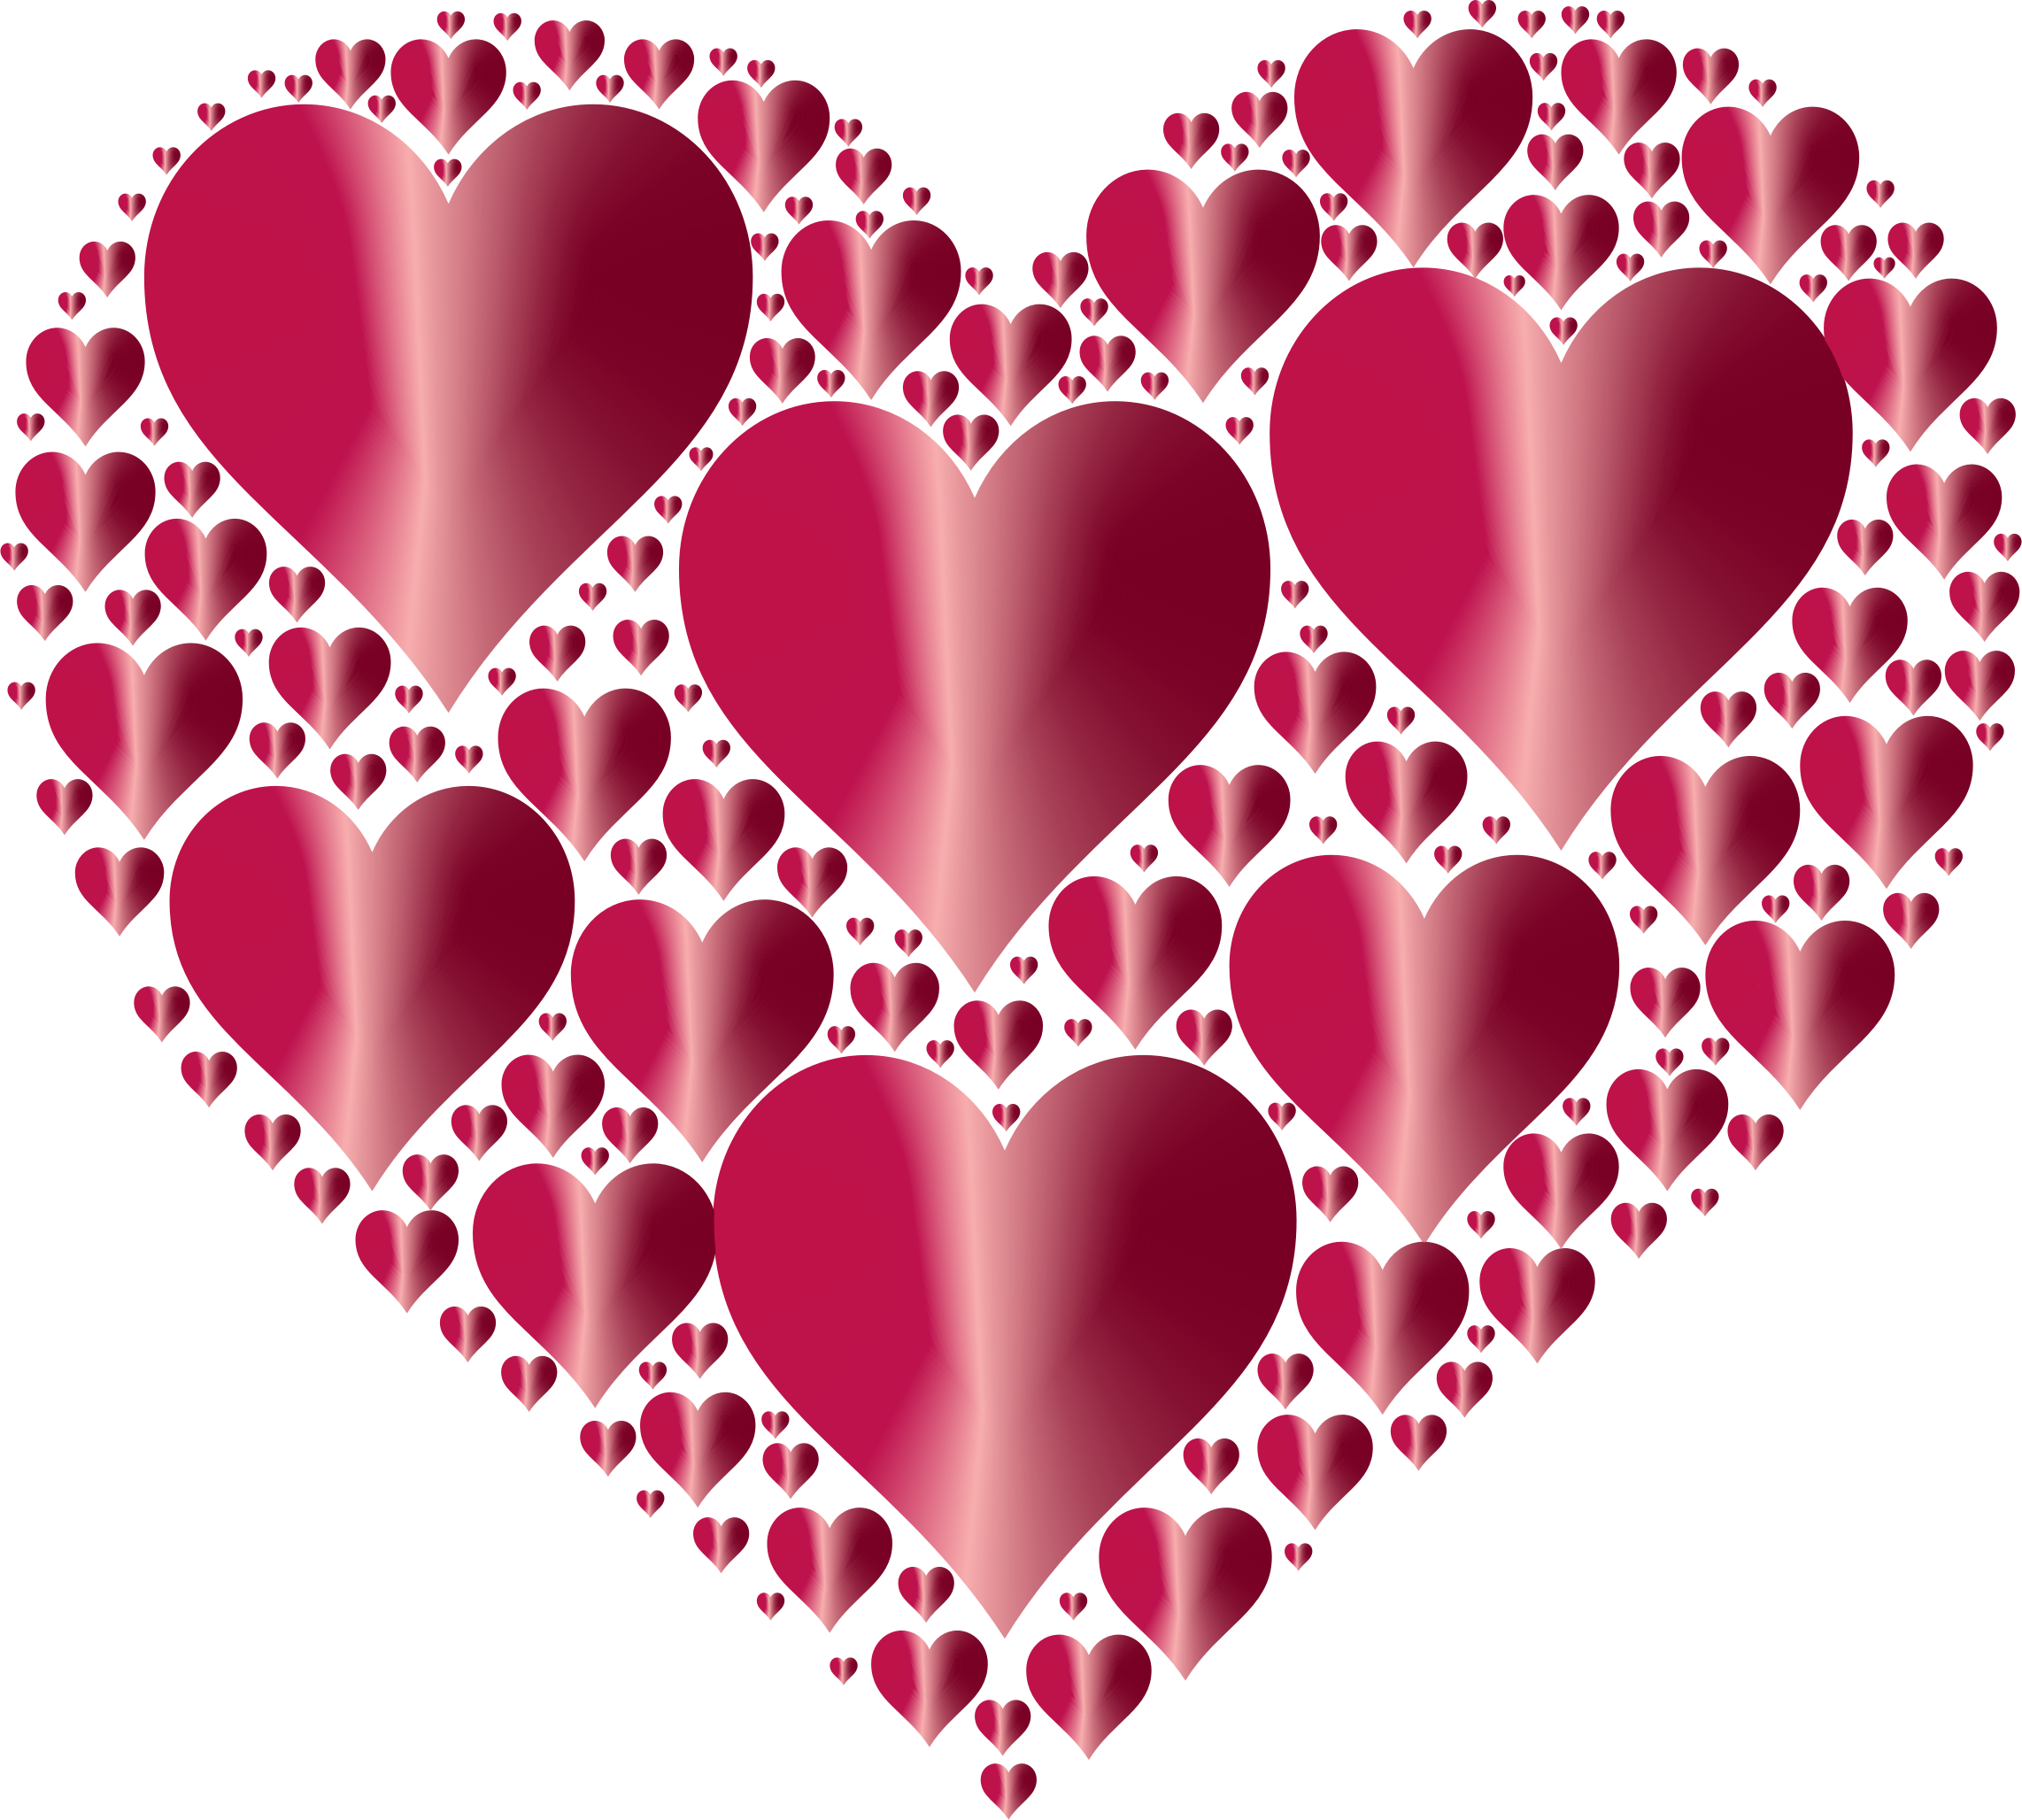 Hearts in rejuvenated no. Heat clipart kind heart